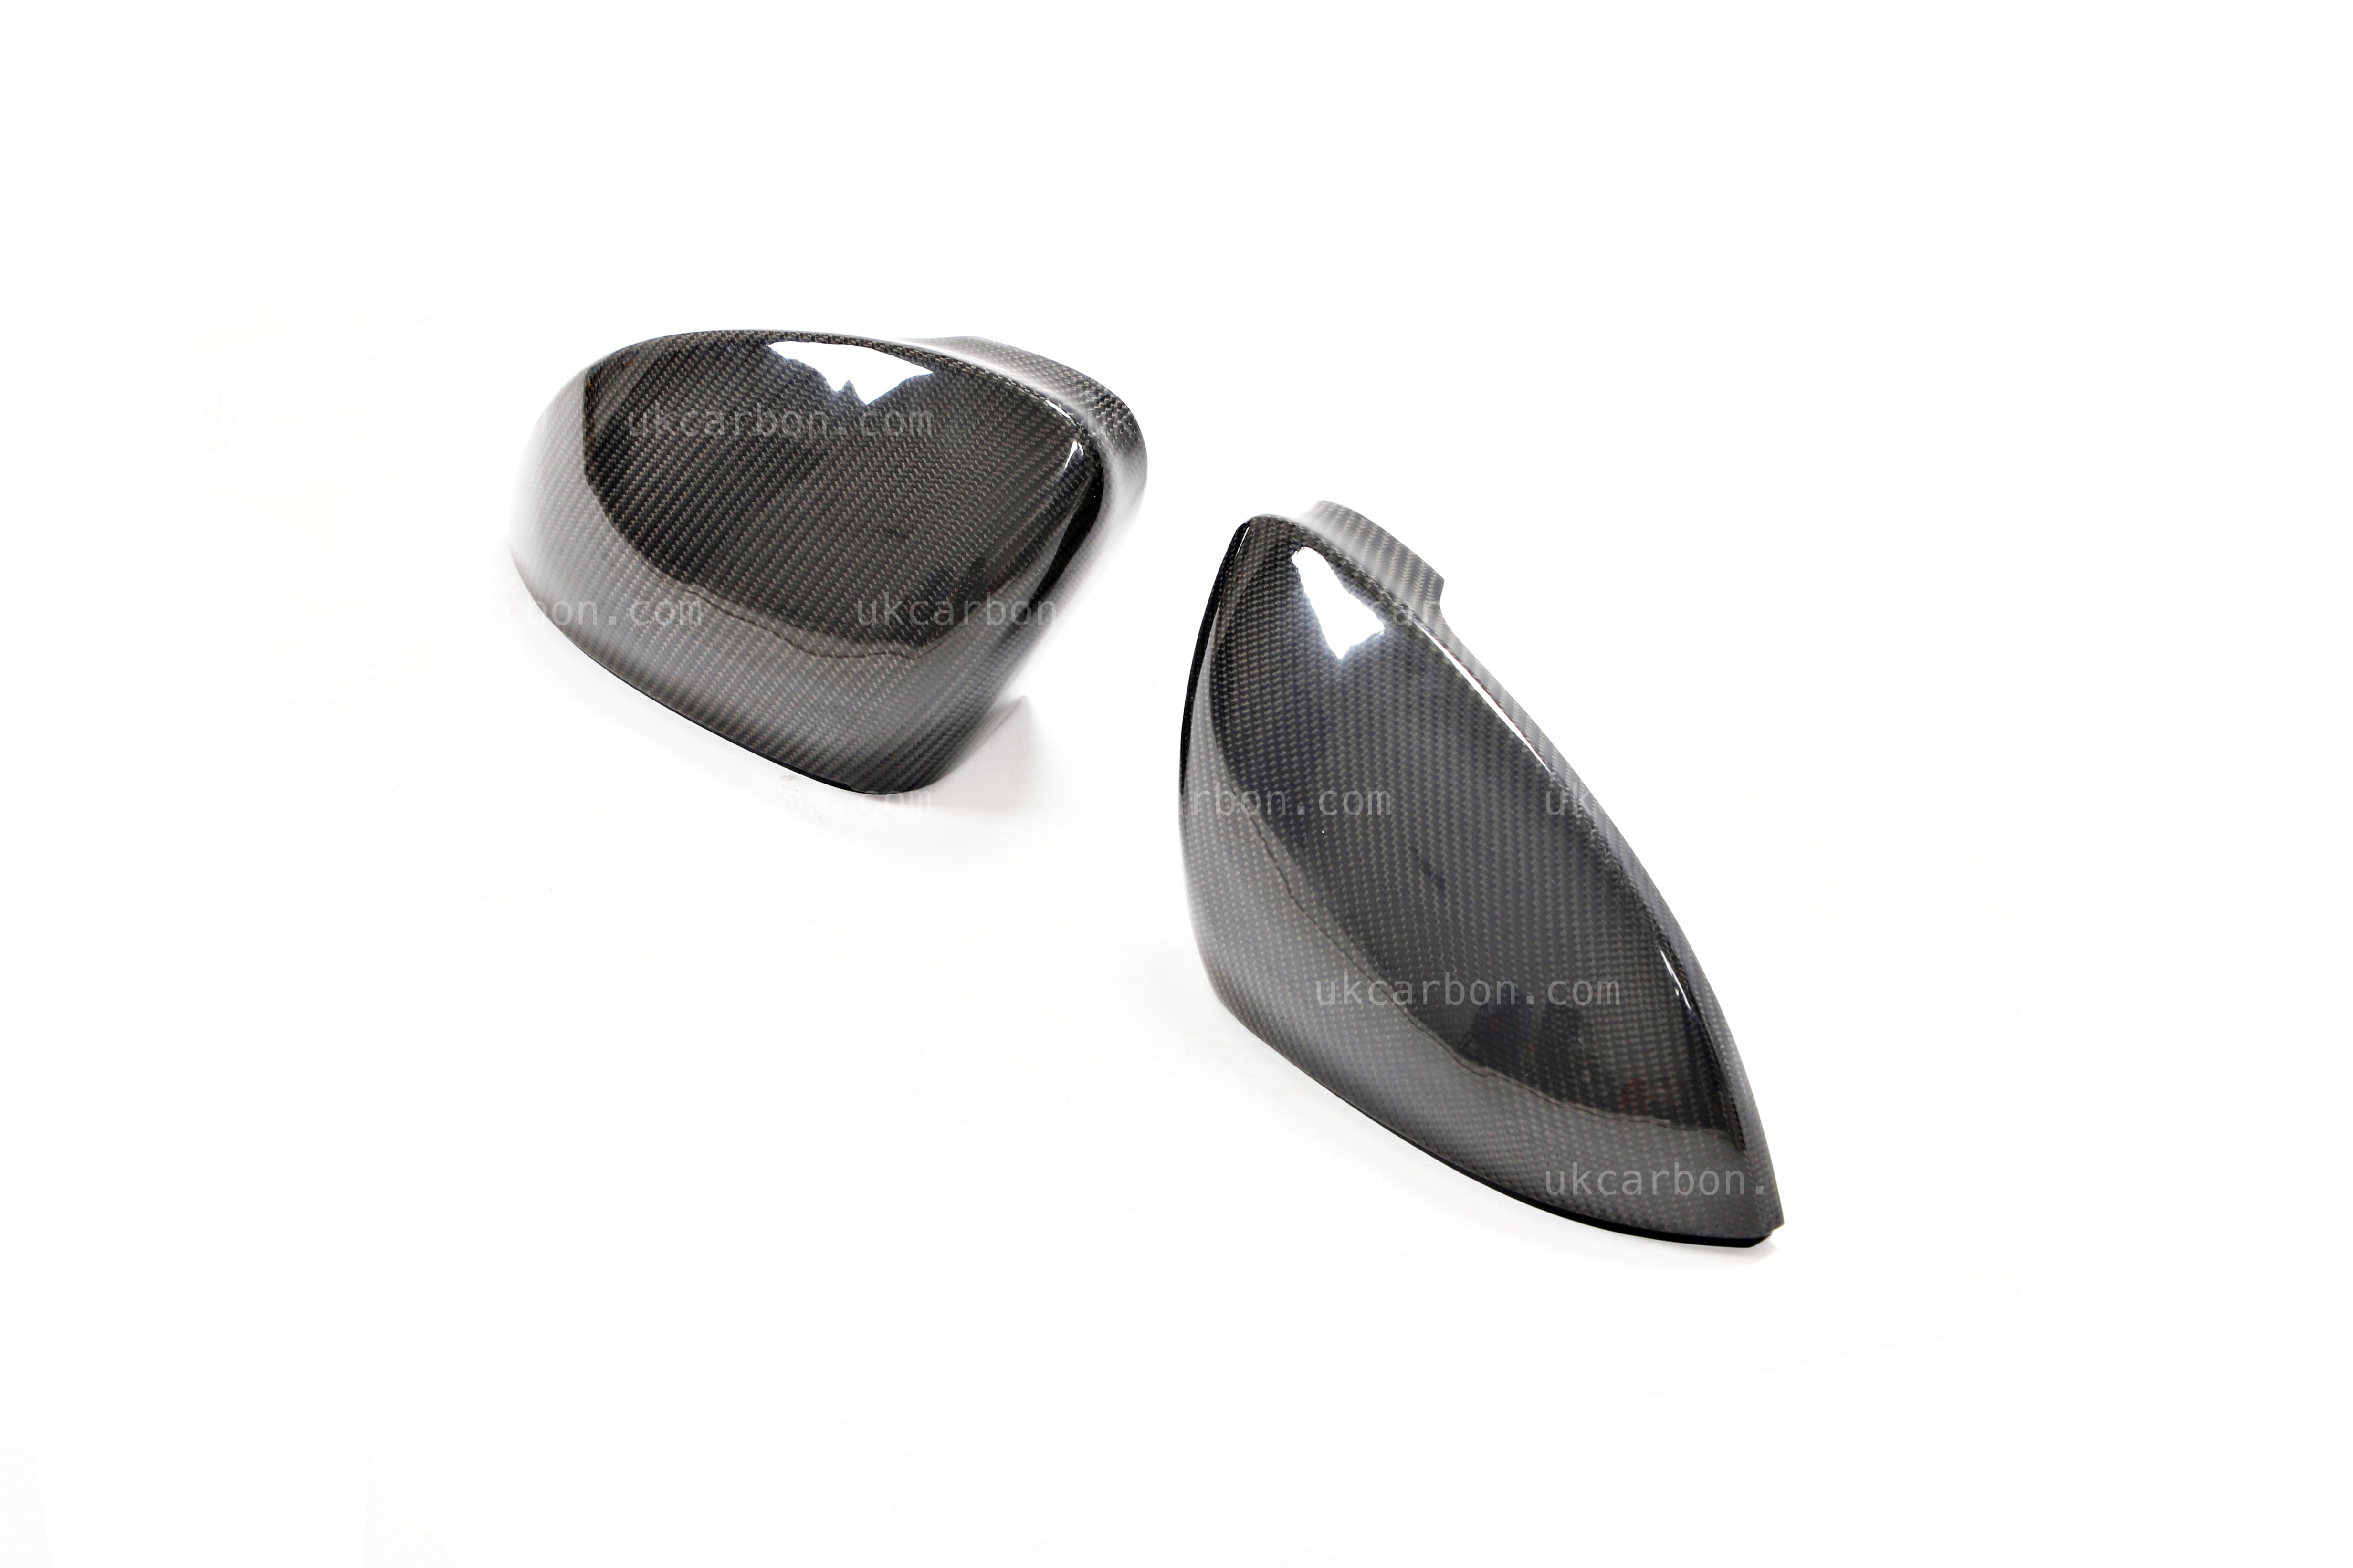 Volkswagen Golf GTI R Carbon Fibre Wing Mirror Cover VW MK8 by UKCarbon